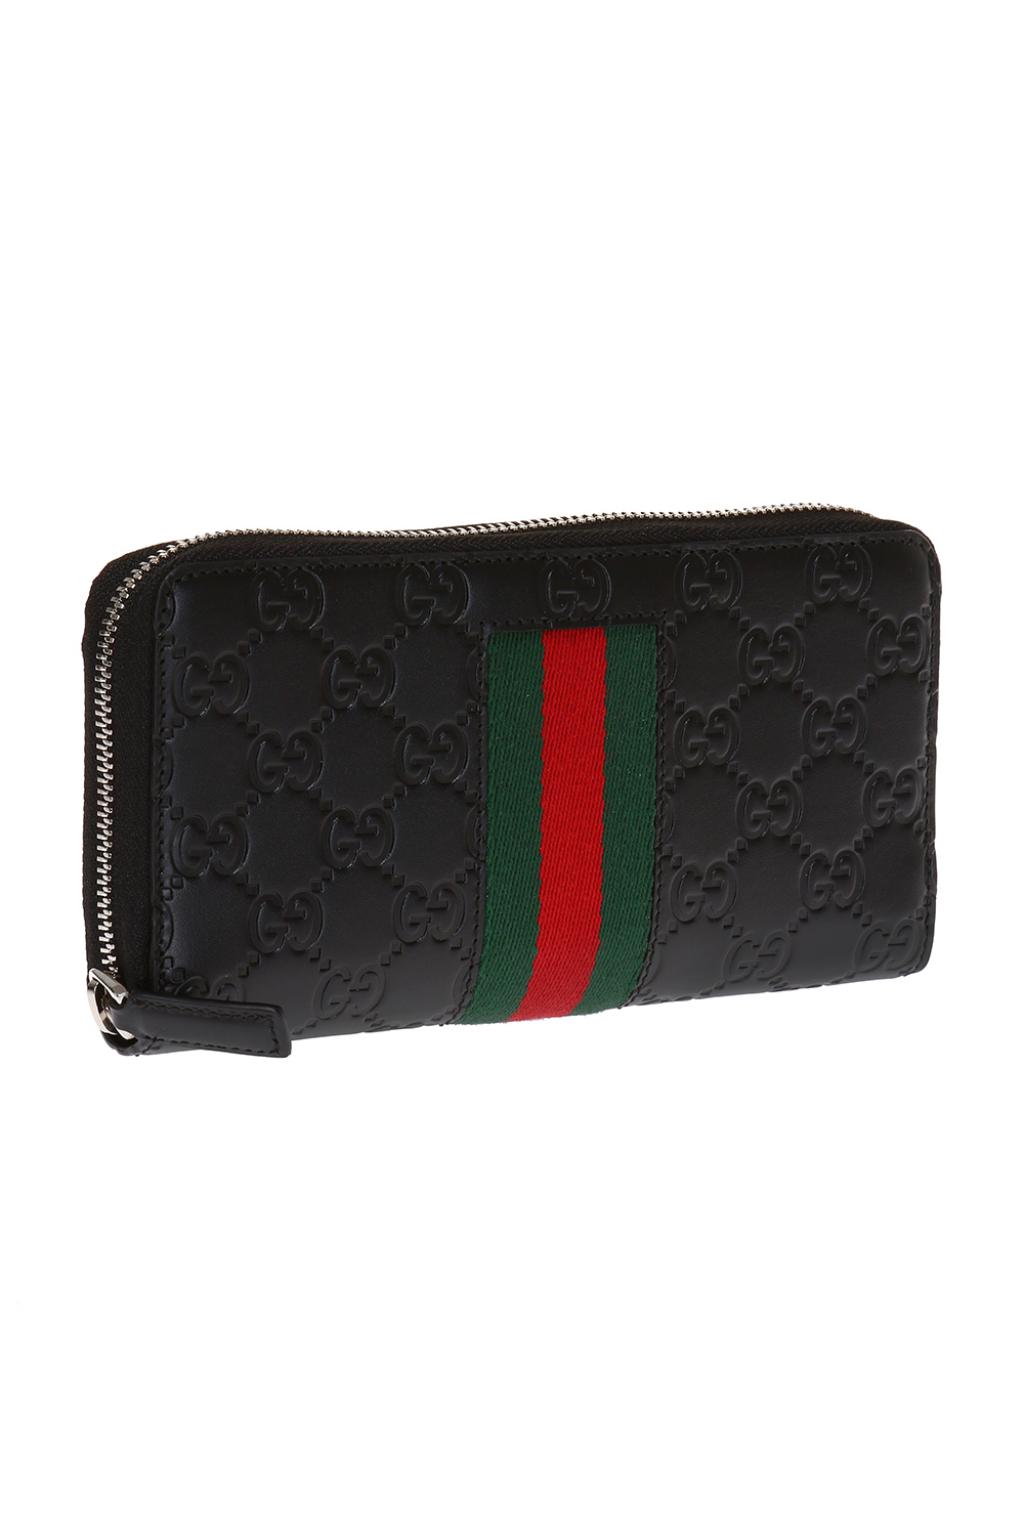 Gucci, Bags, Brand New Gucci Black Embossed Red Green Stripe Leather